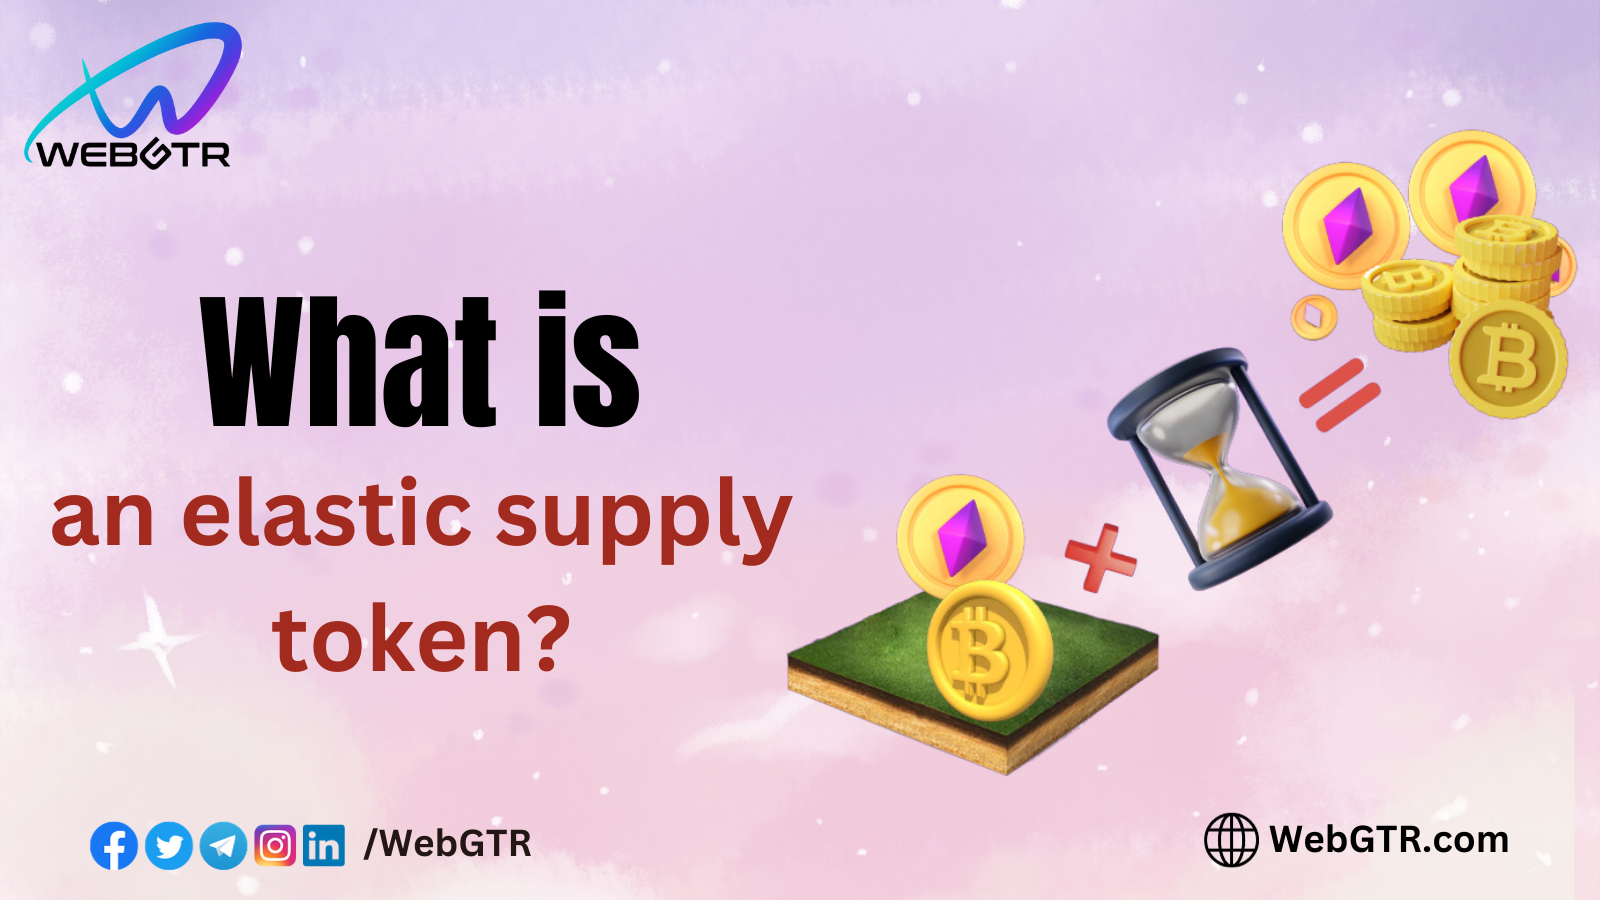 What is an elastic supply token?